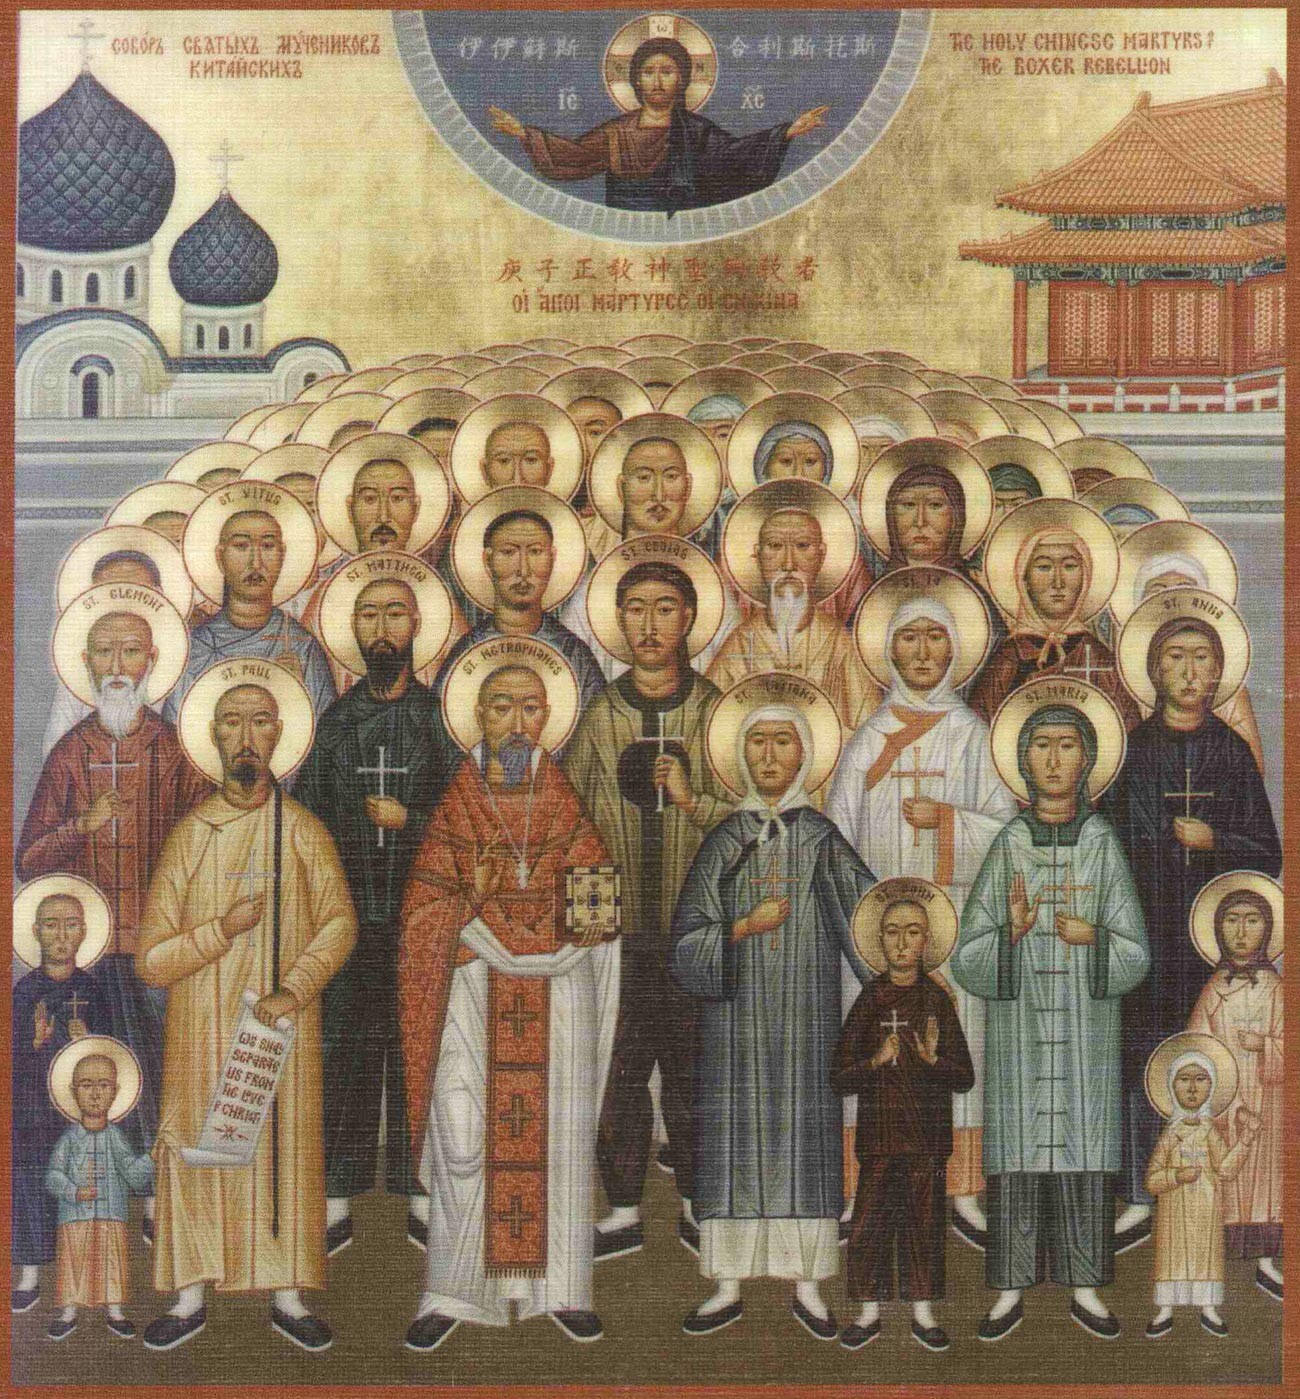 The Chinese Martyrs, icon.